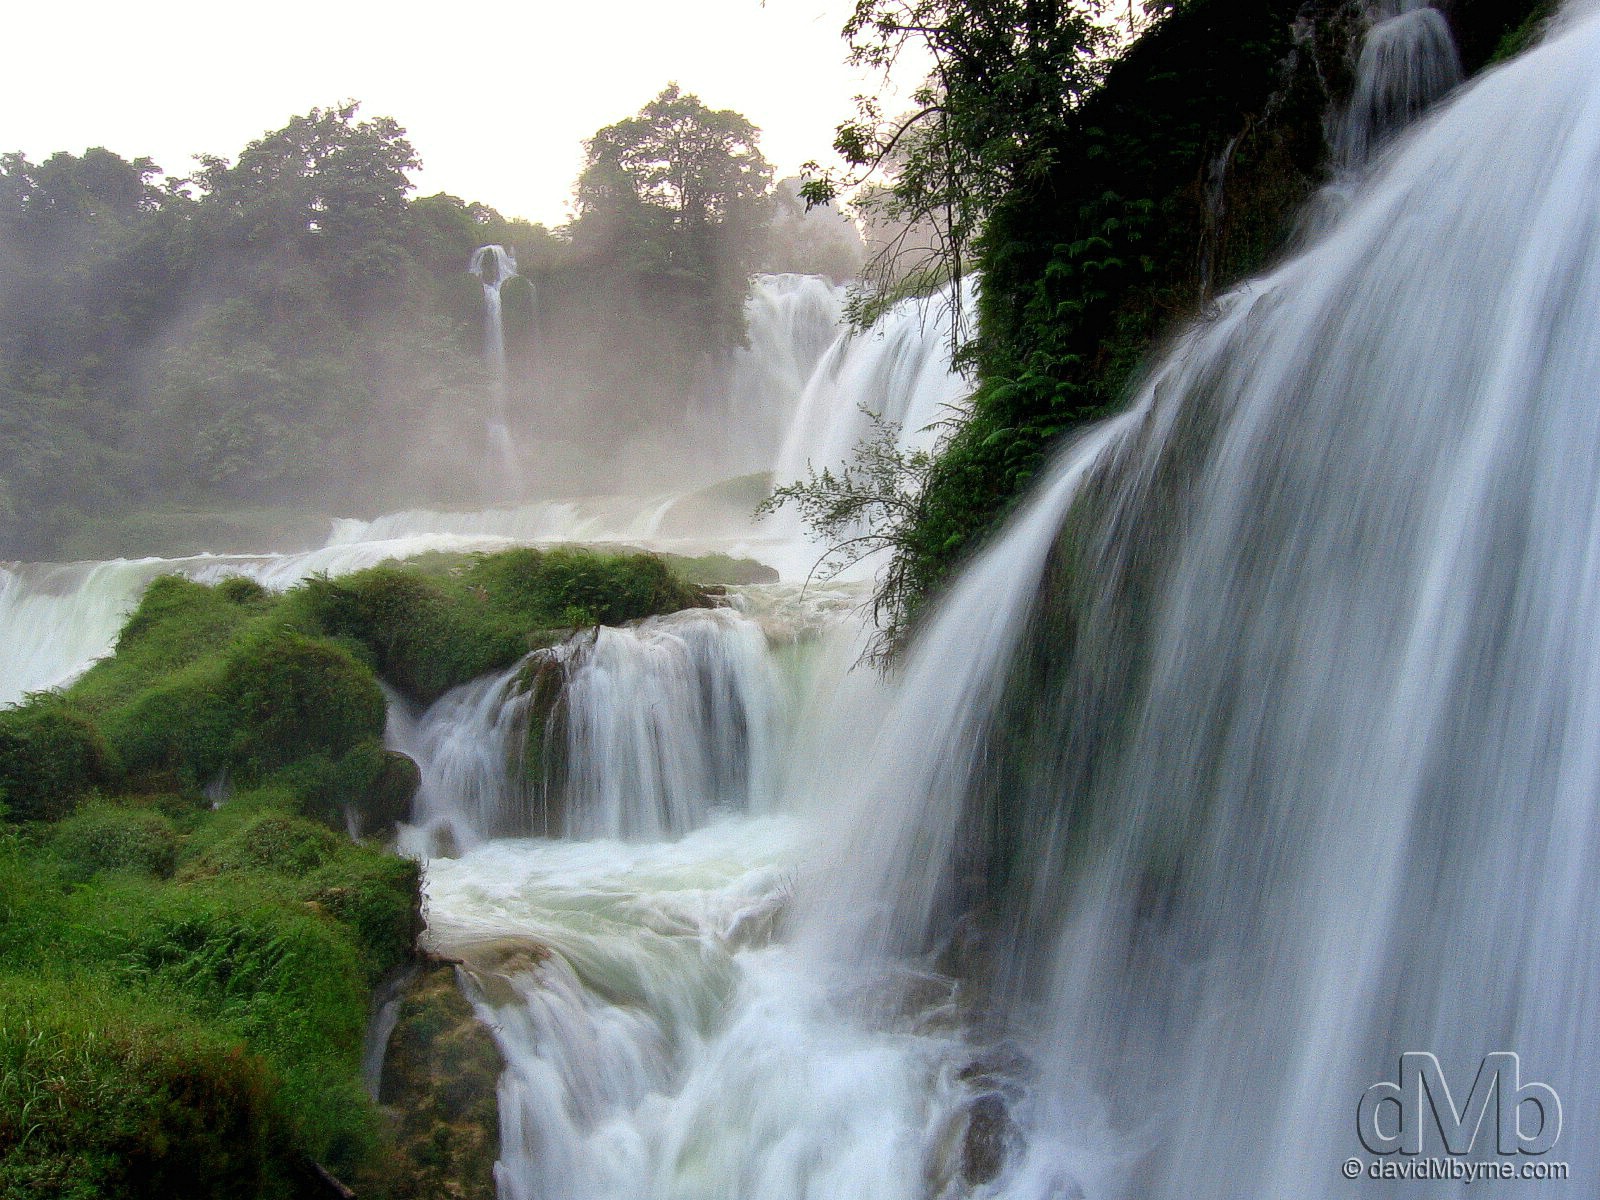 The multi-tiered Detian Falls on the Chinese/Vietnamese Border. September 1st, 2005.